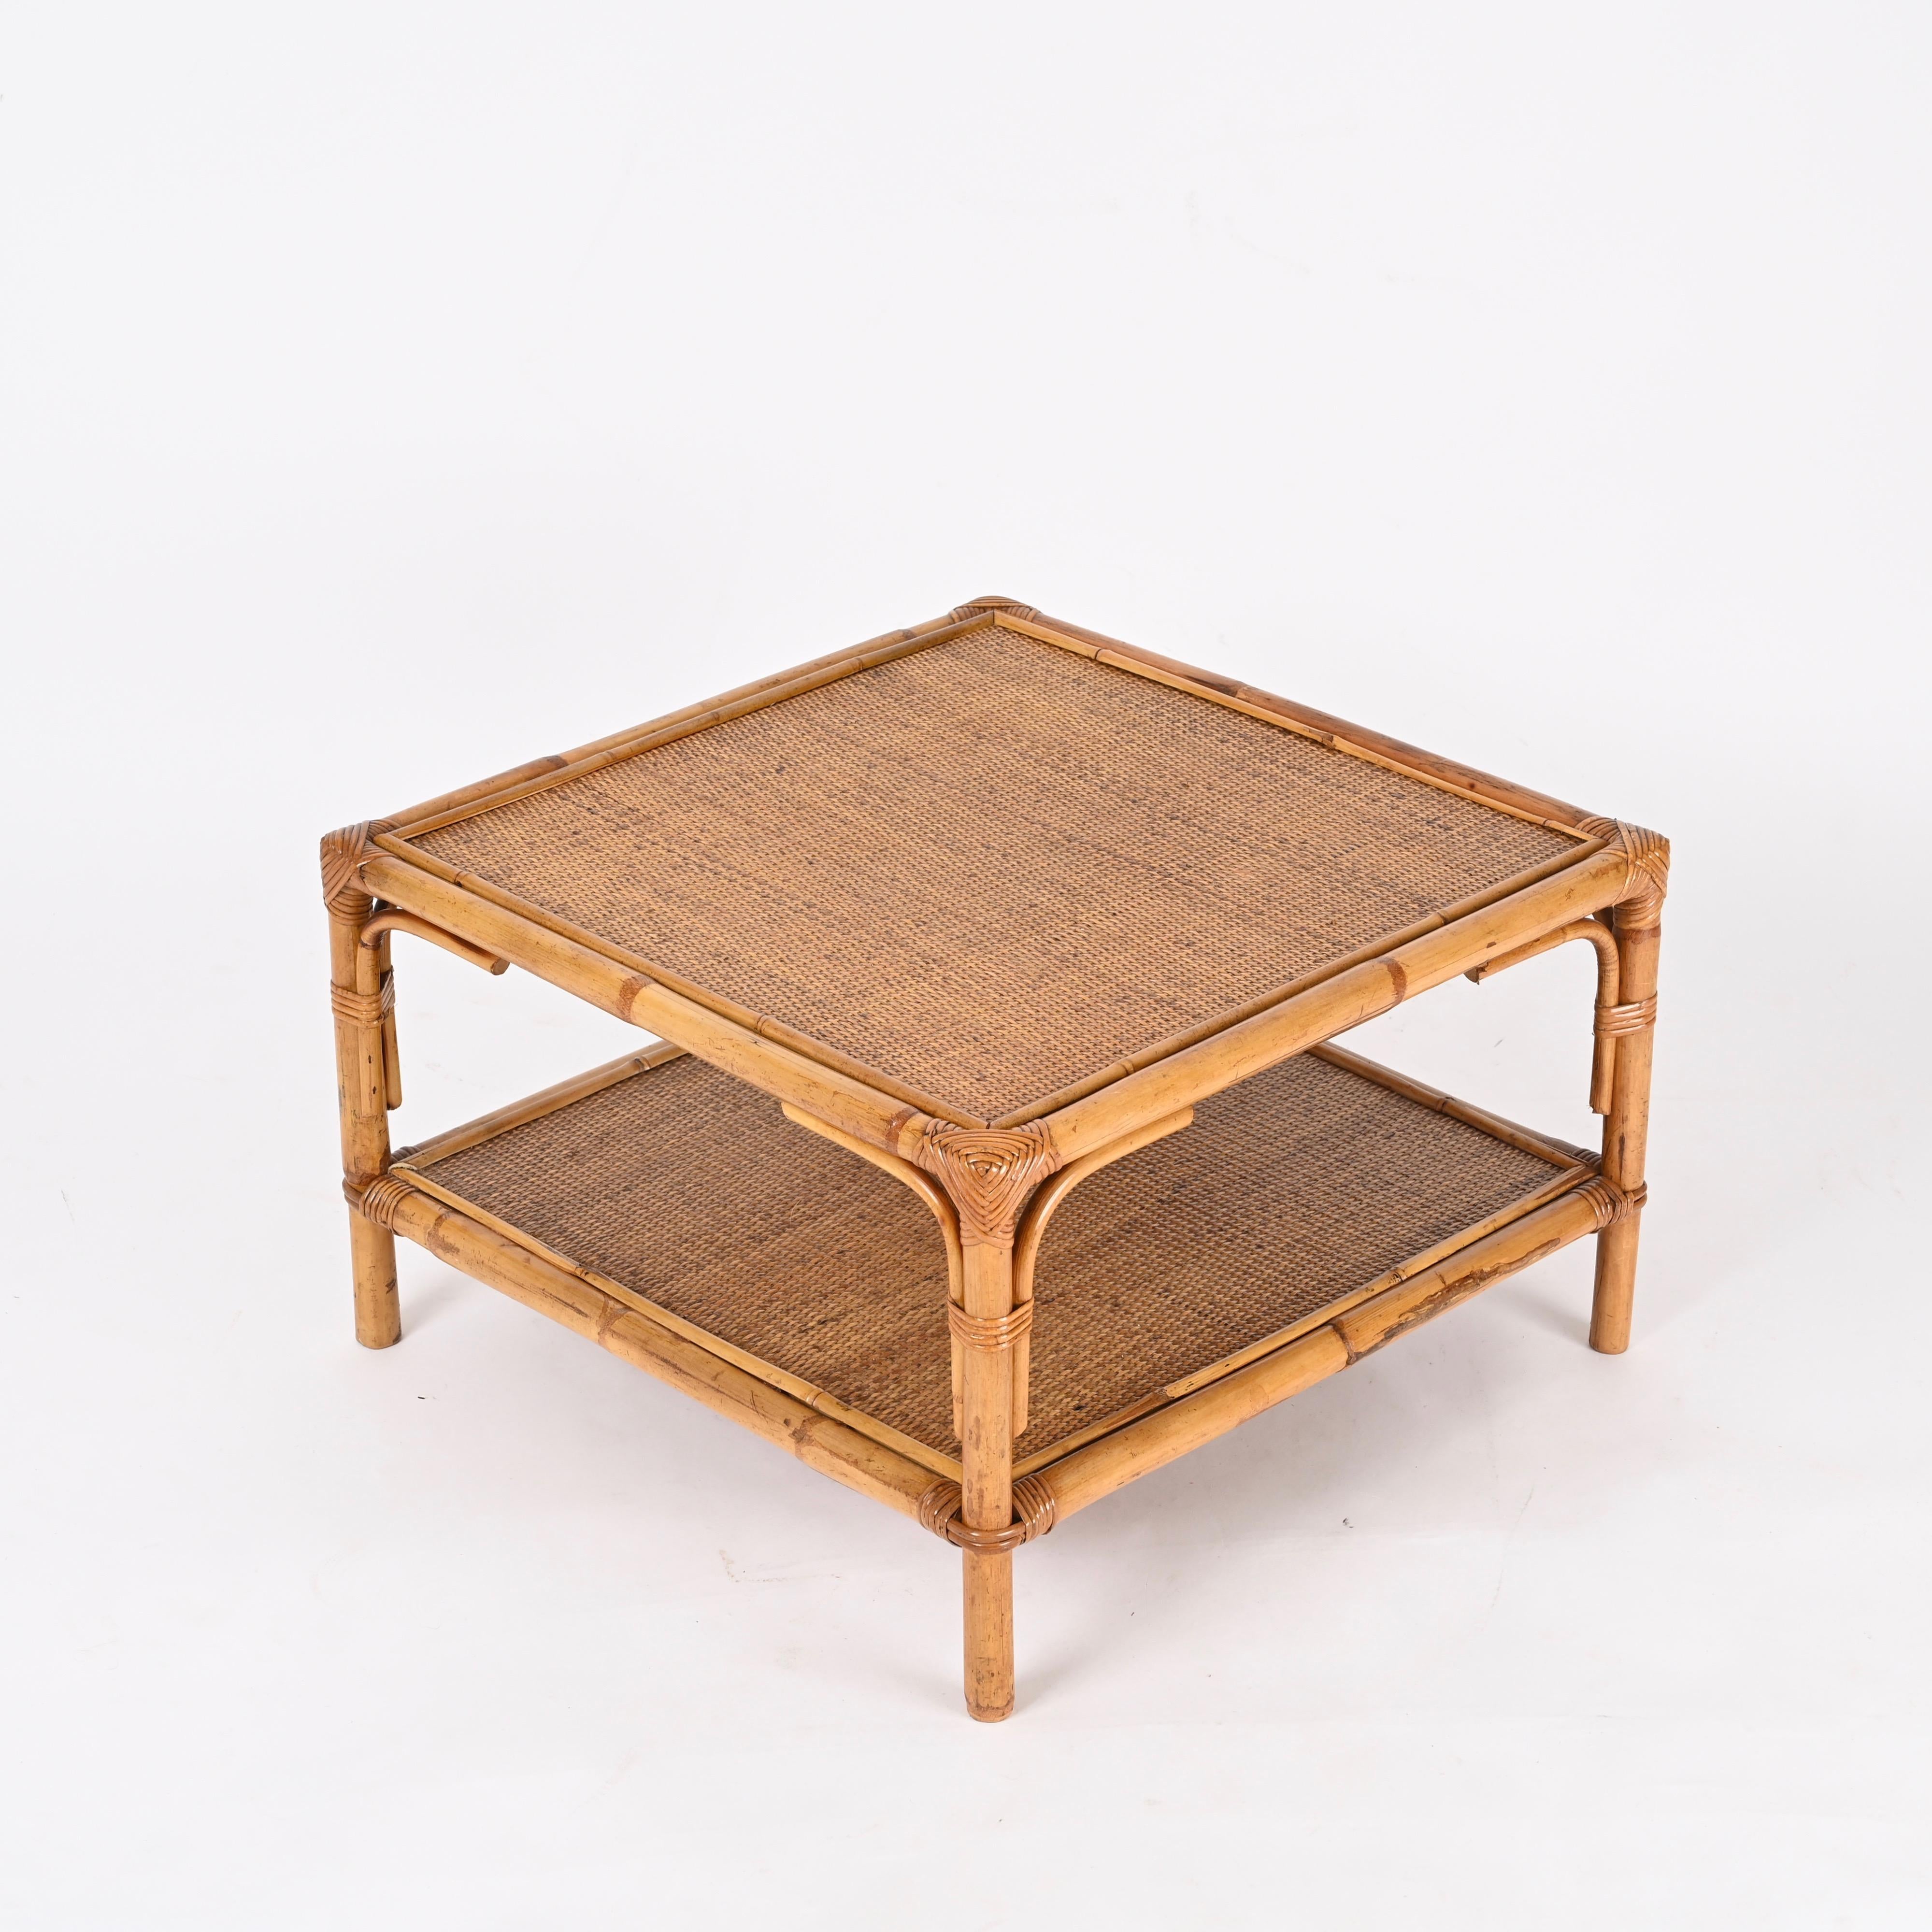 Mid-Century Modern Vivai del Sud Midcentury Italian Square Coffee Table in Bamboo and Rattan, 1970s For Sale